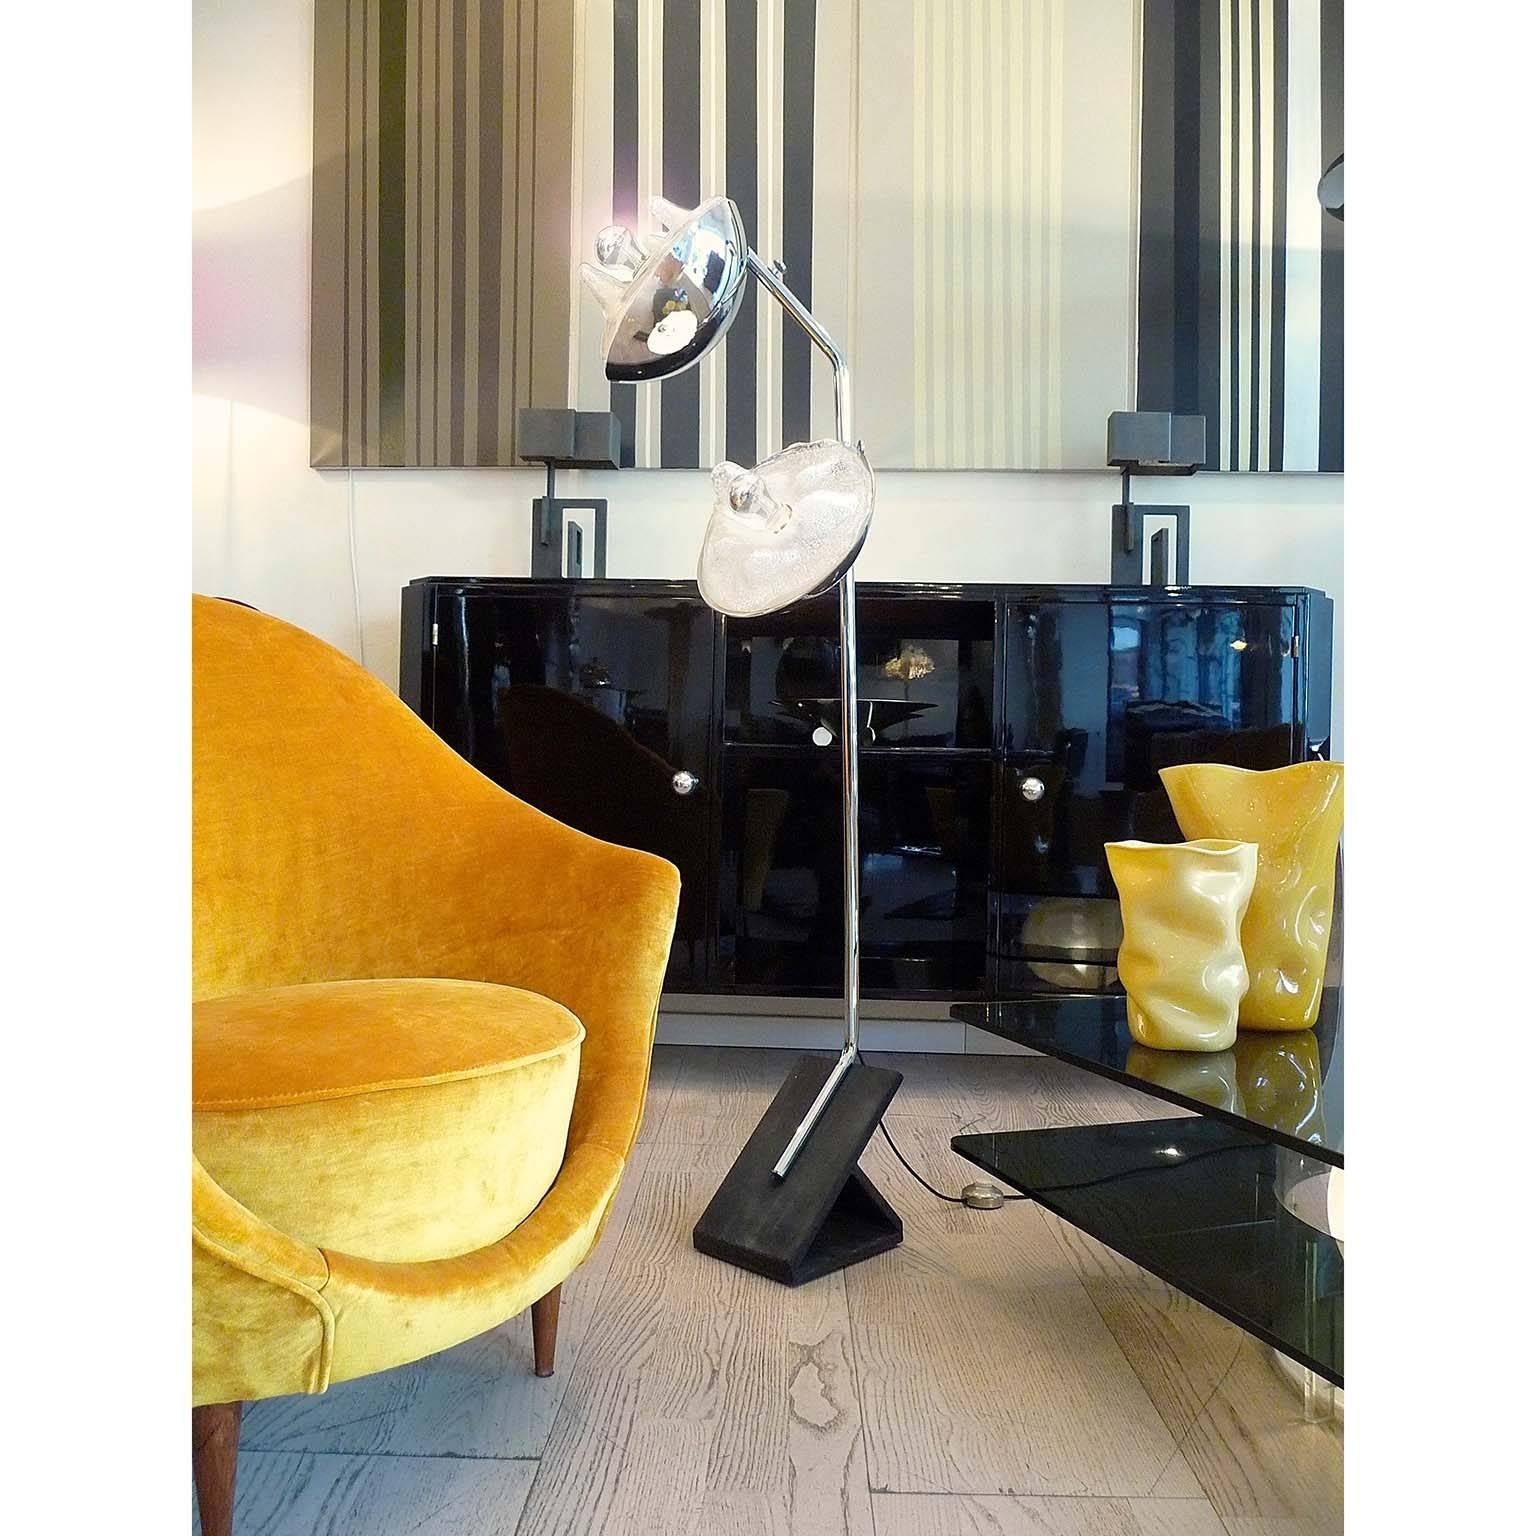 A beautiful floor lamp realized in bollicine glass diffusers (glass with small air bubbles inside), supported by chromed semi spheres, mounted on a vertical stem. Top light can be adjusted and rotated. Metal base made of very heavy patinated iron